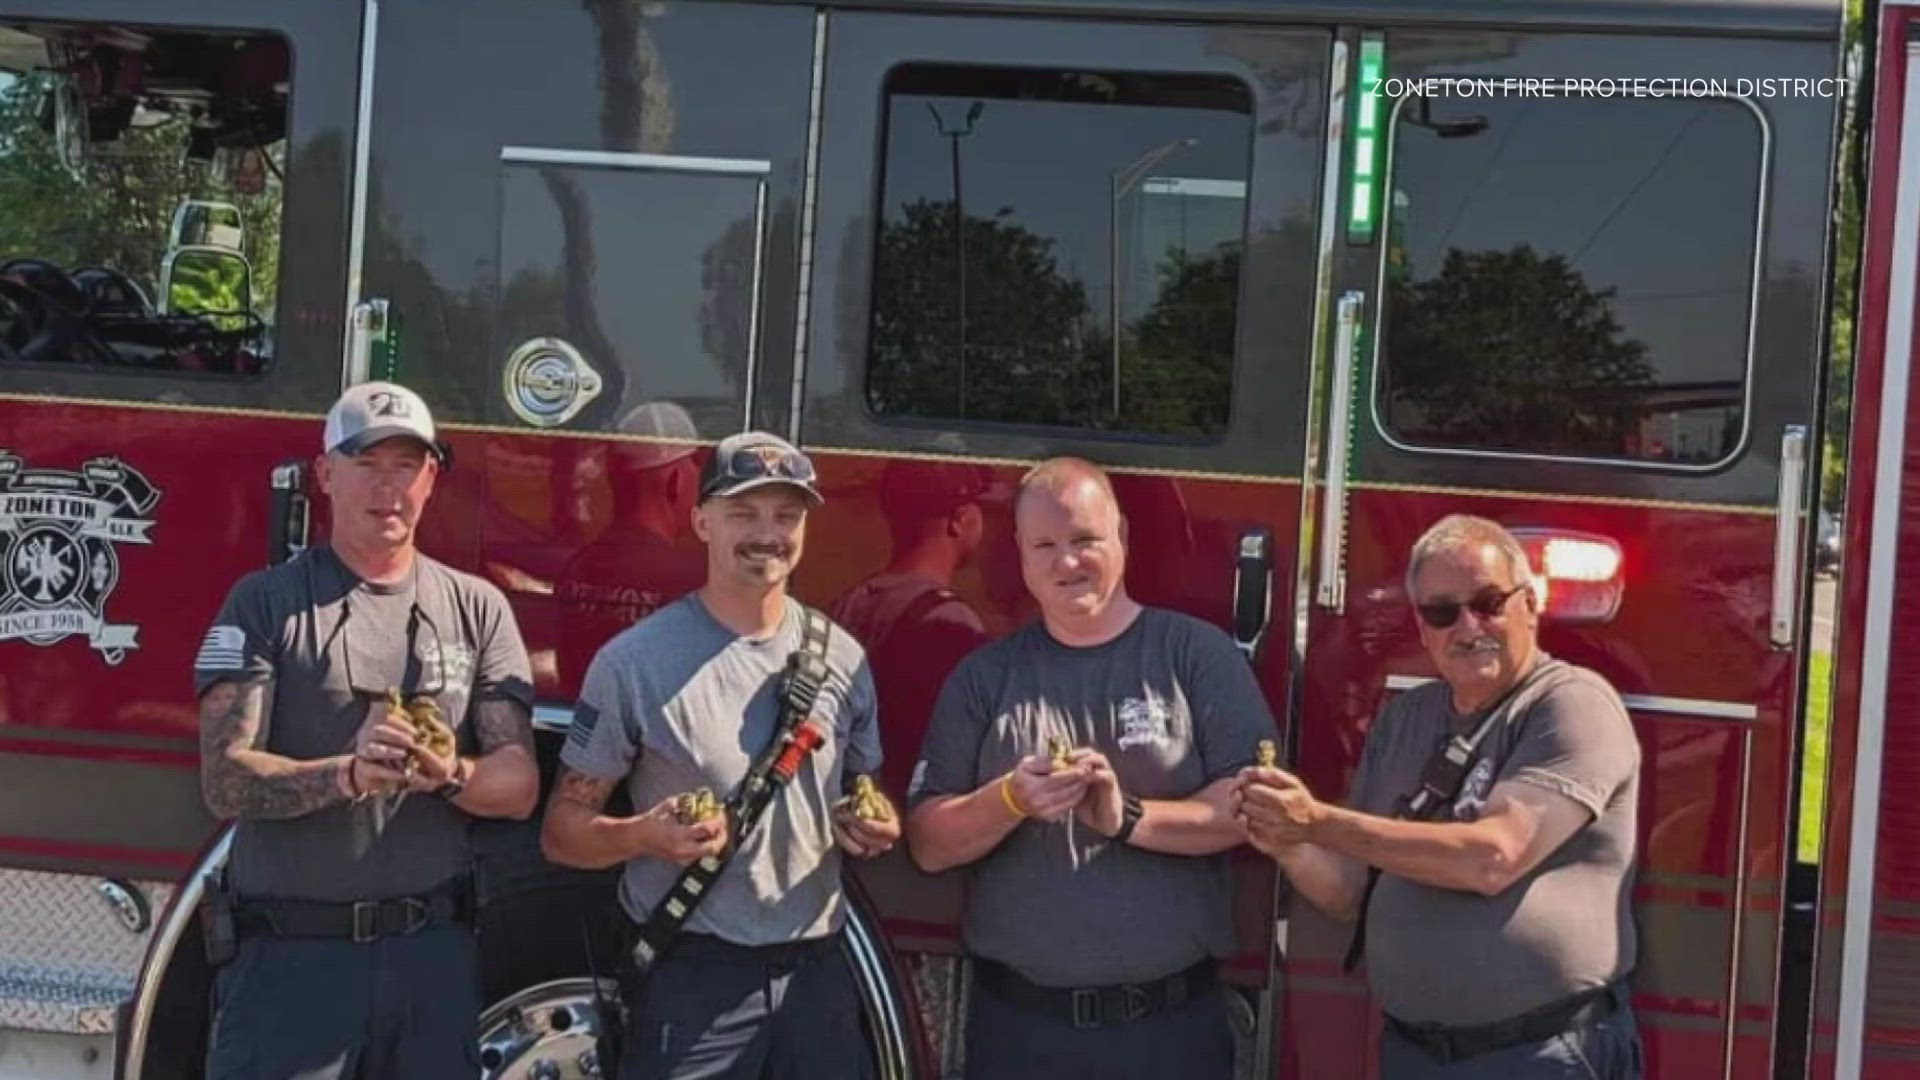 Zoneton Firefighters rescued a group of ducklings in Shepherdsville yesterday.